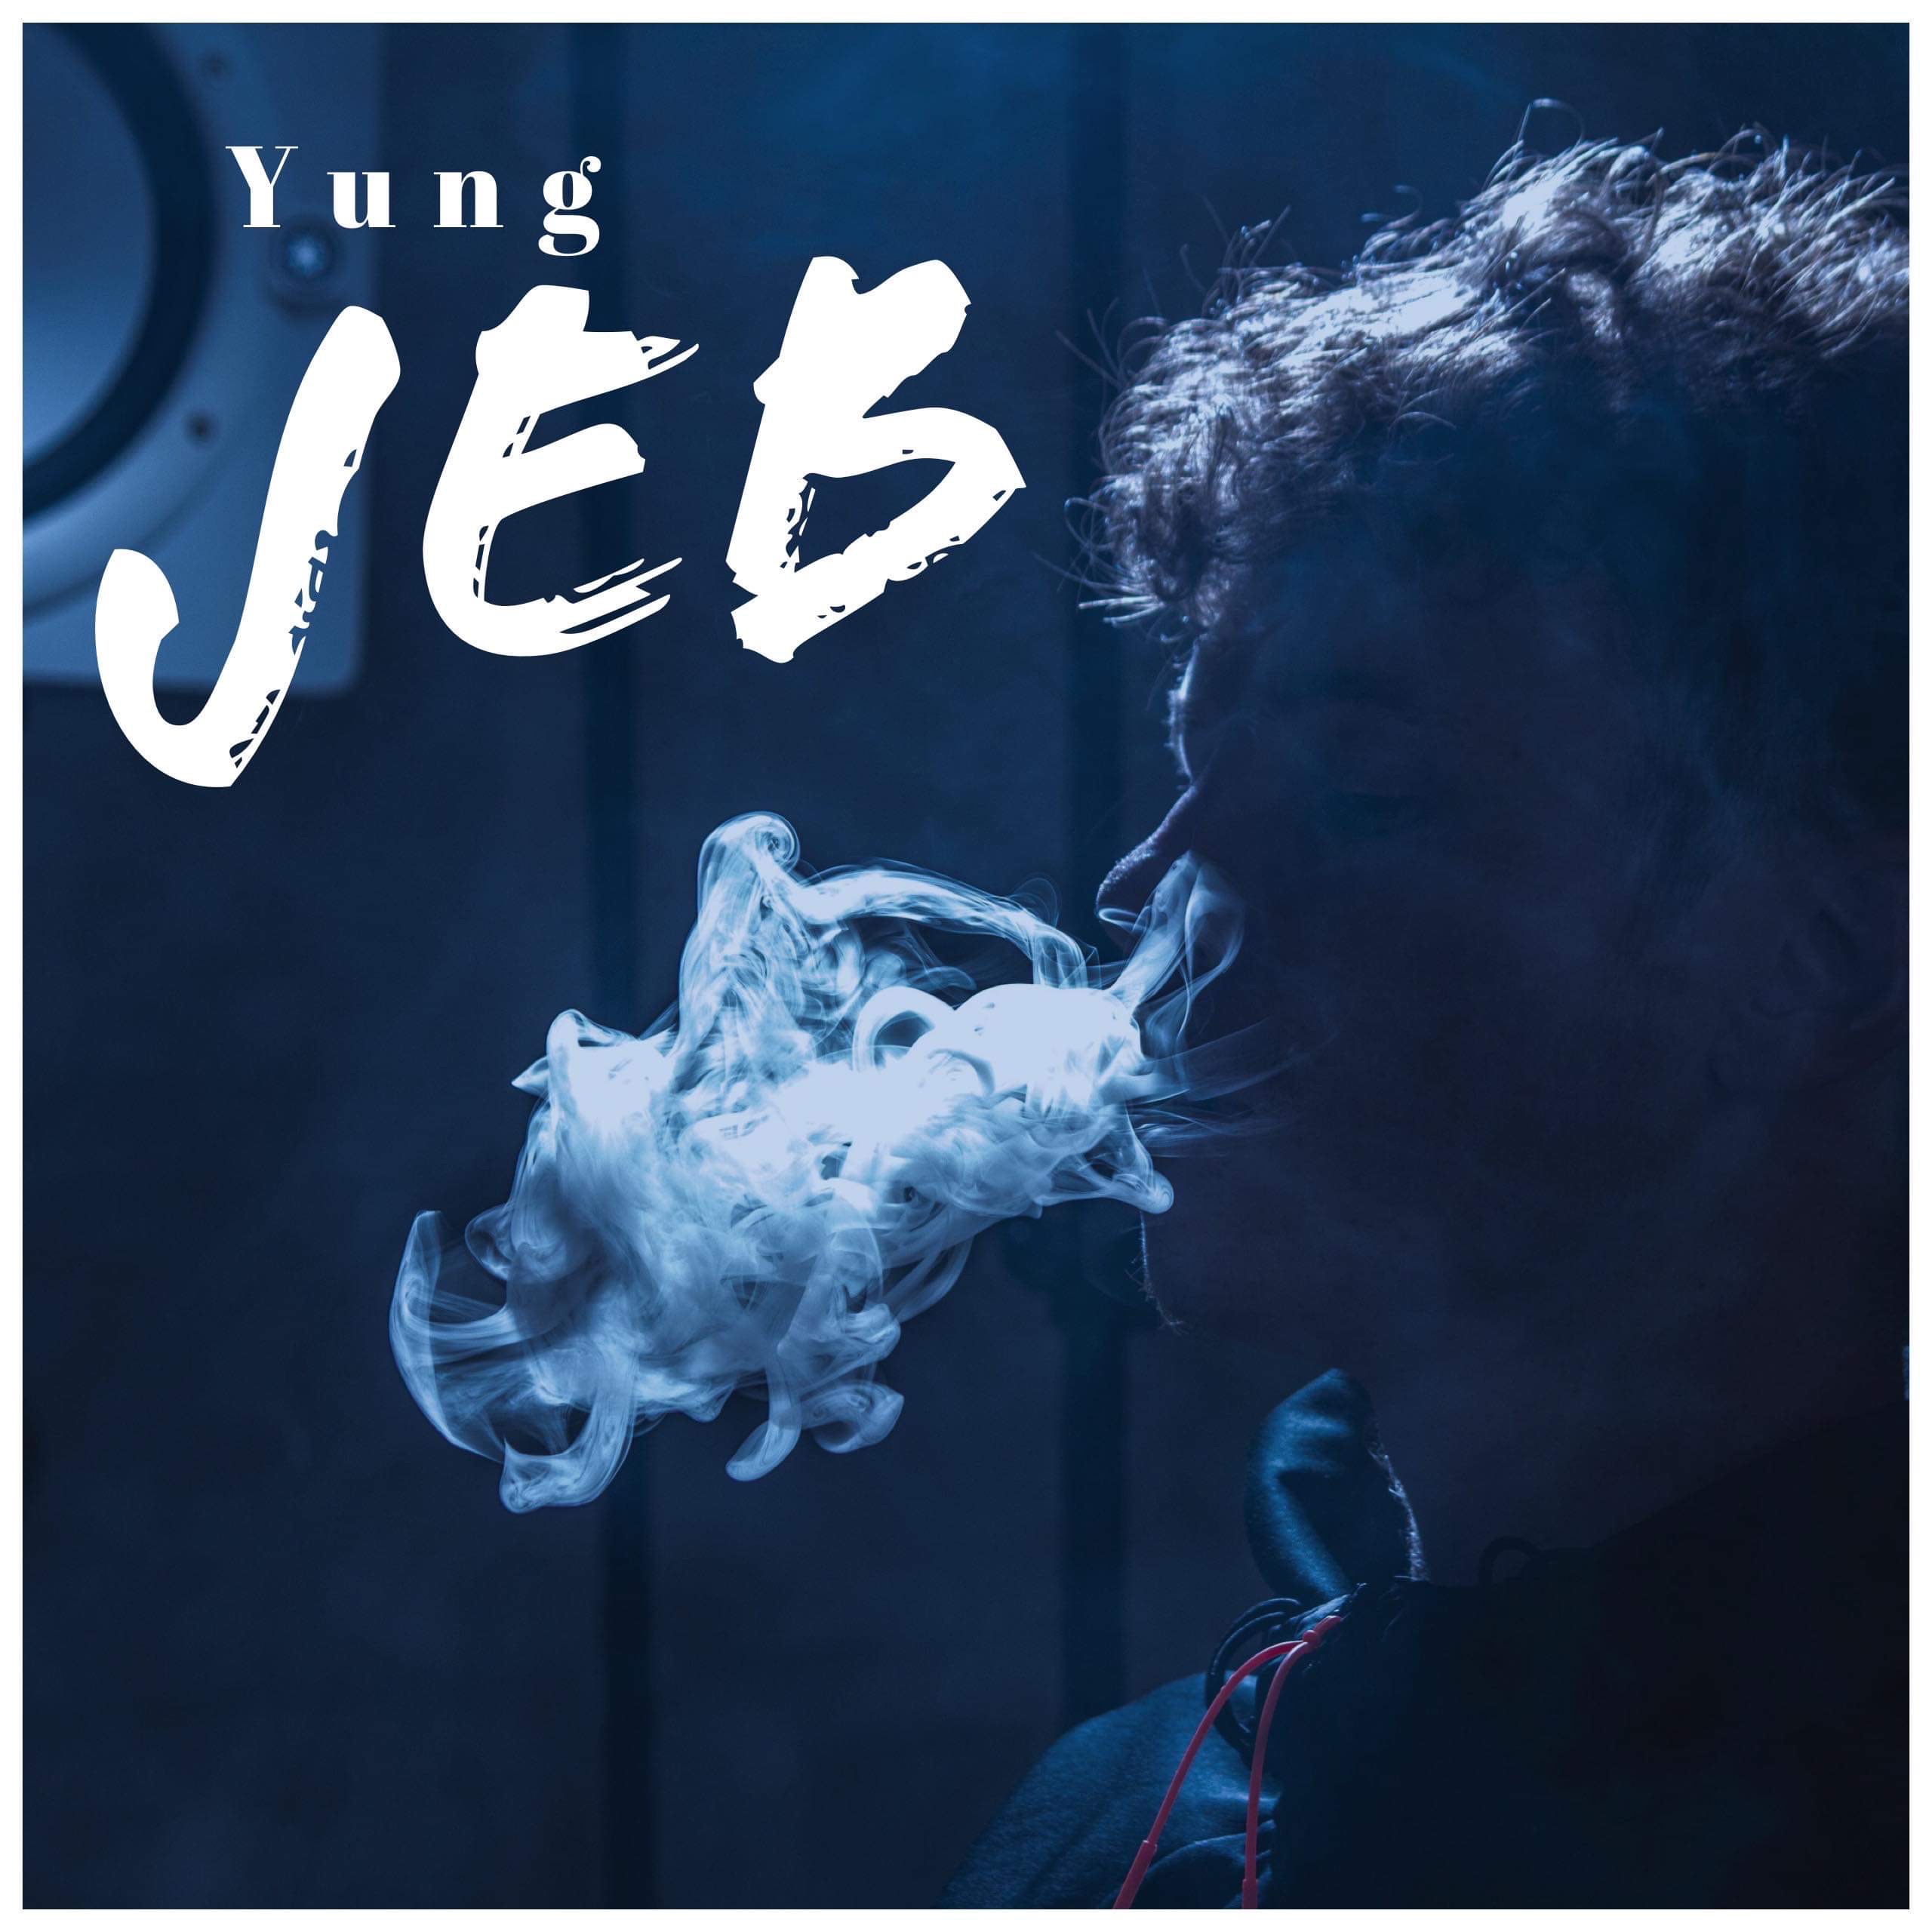 Yung Jeb - Never Knew EP